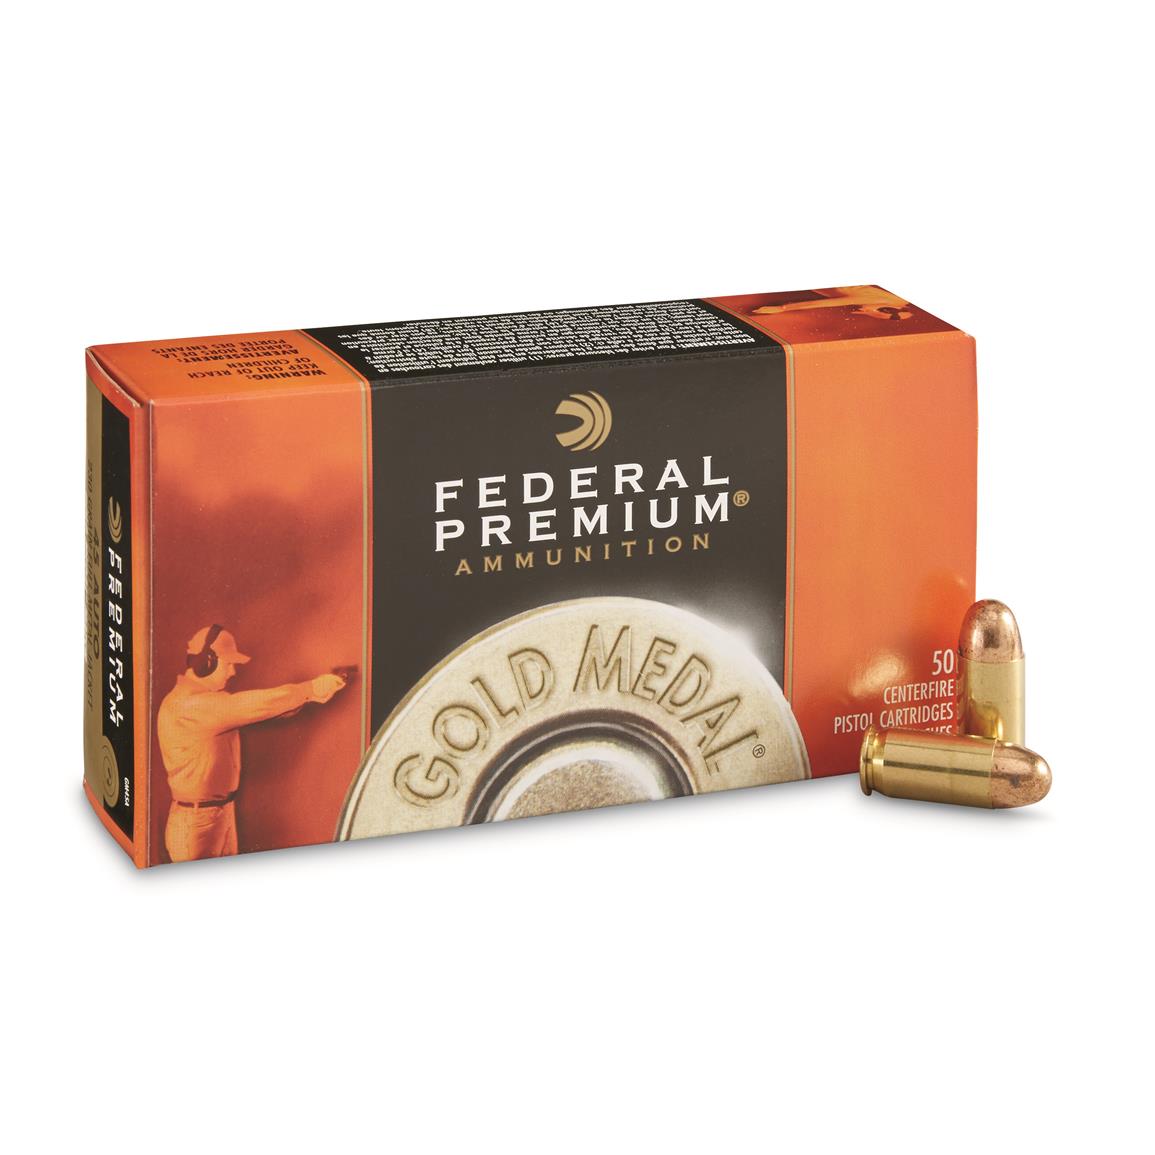 Federal Premium Gold Medal, .45 Auto, FMJ Match, 230 Grain, 50 Rounds